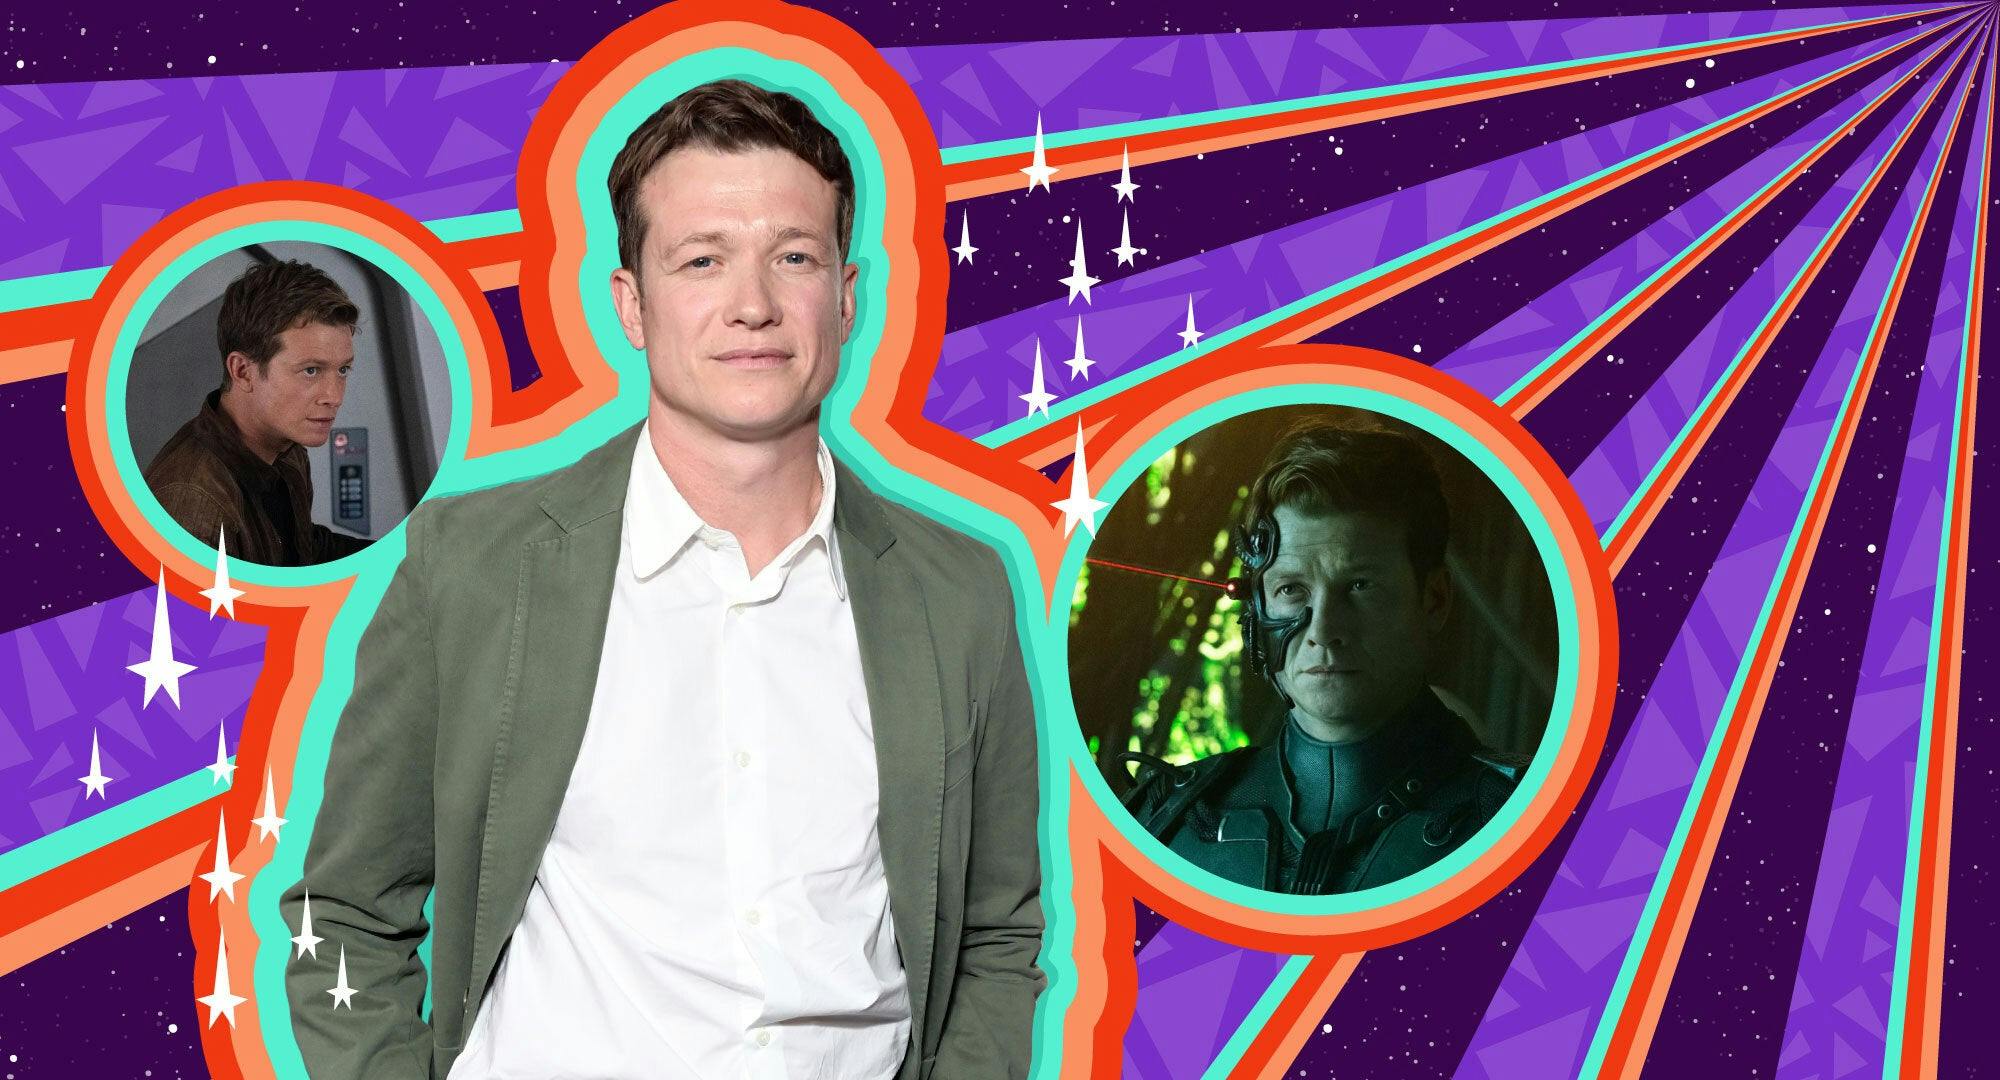 Illustrated banner featuring Ed Speleers and his Star Trek: Picard character Jack Crusher and Võx